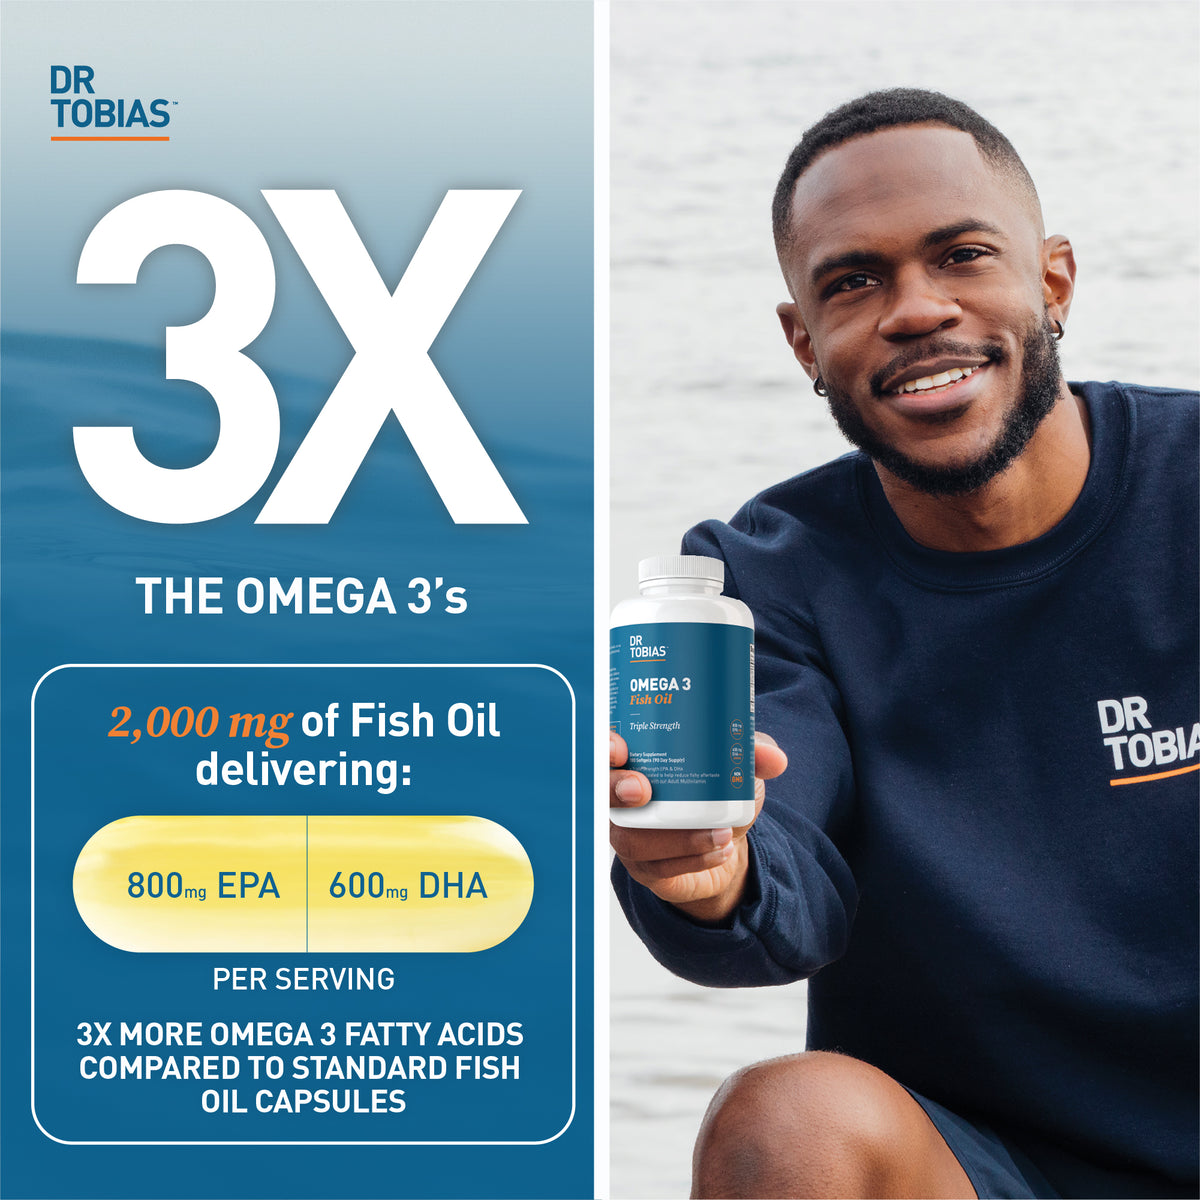 3xs the omega 3 with 2,000 mg of fish oil